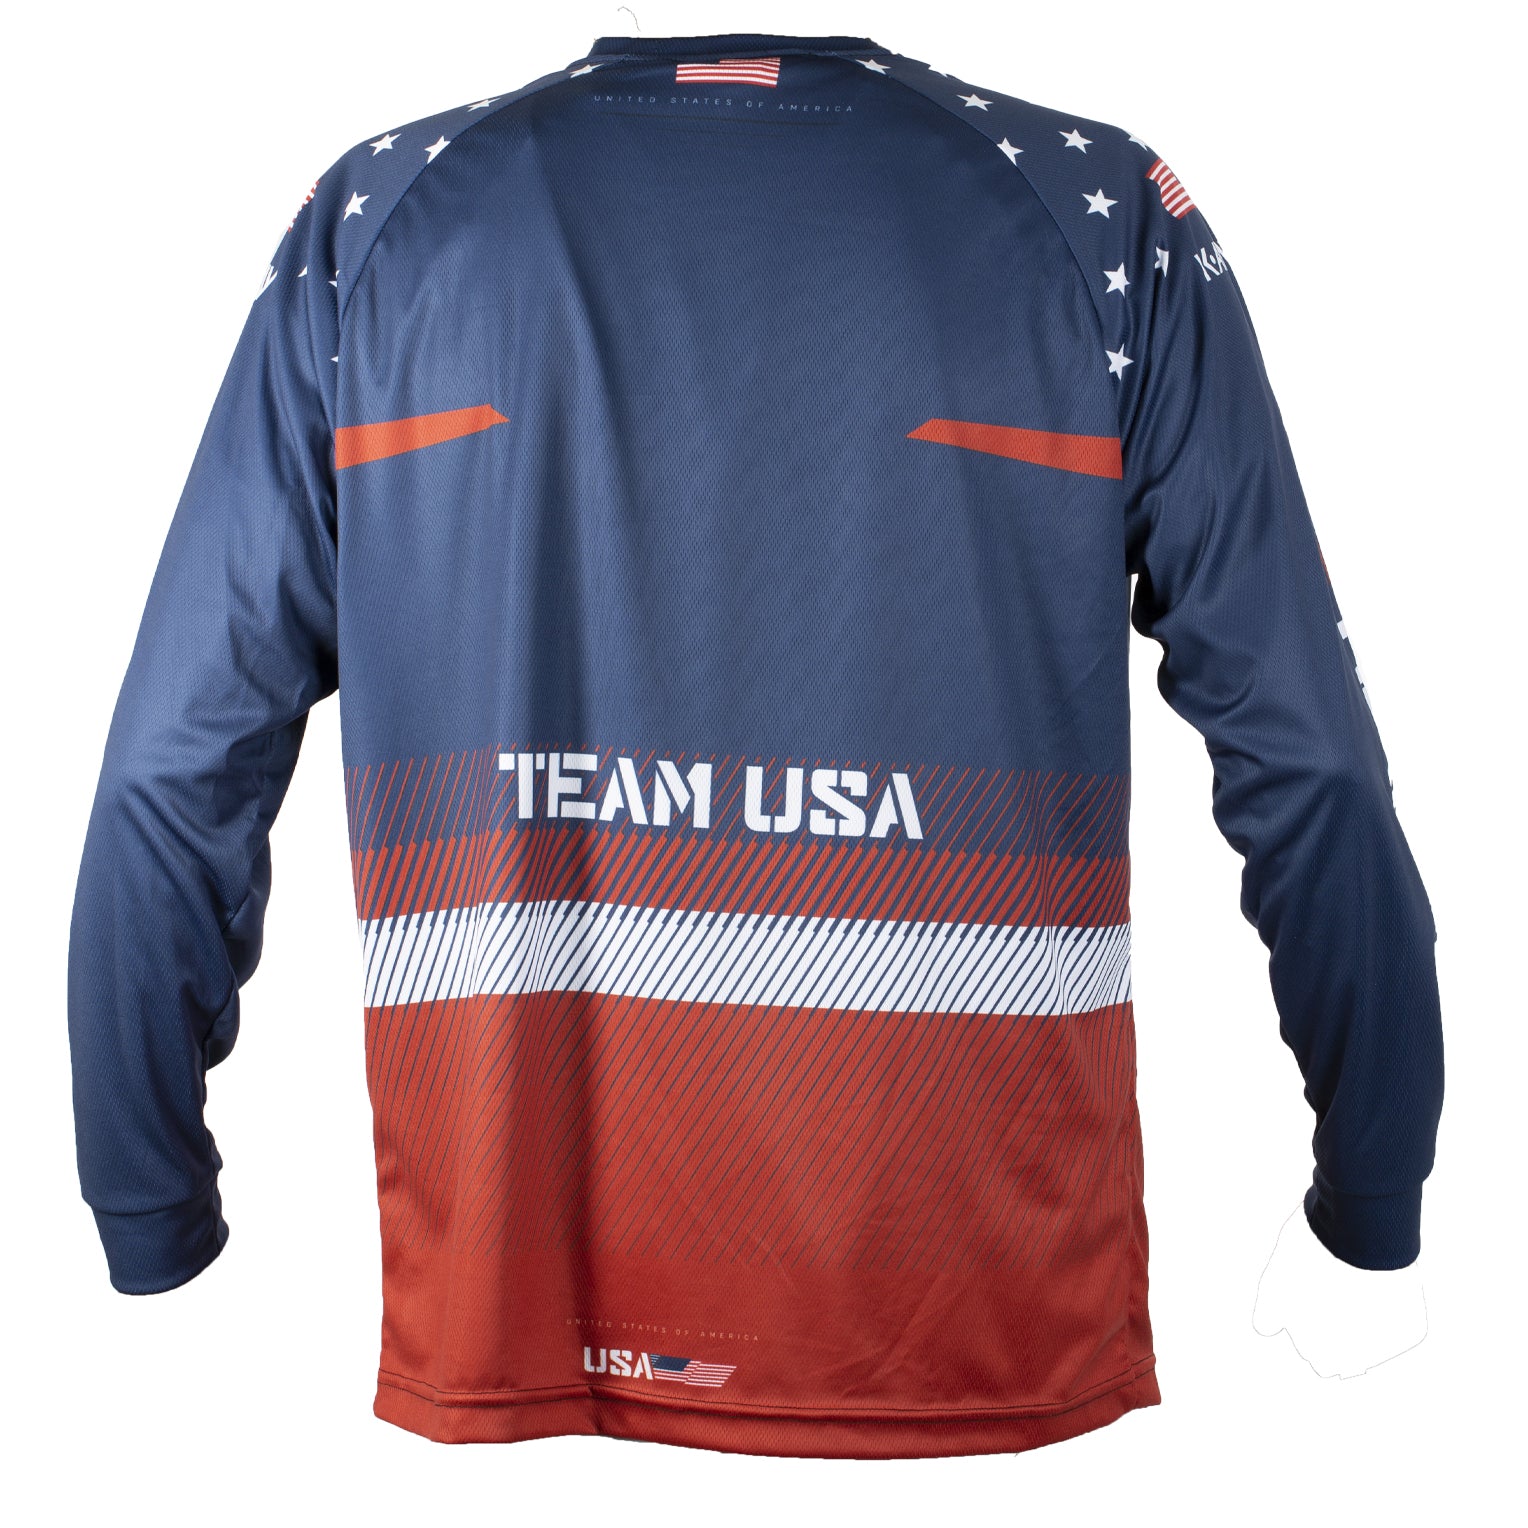 Team USA - Dry Fit - Practice Jersey